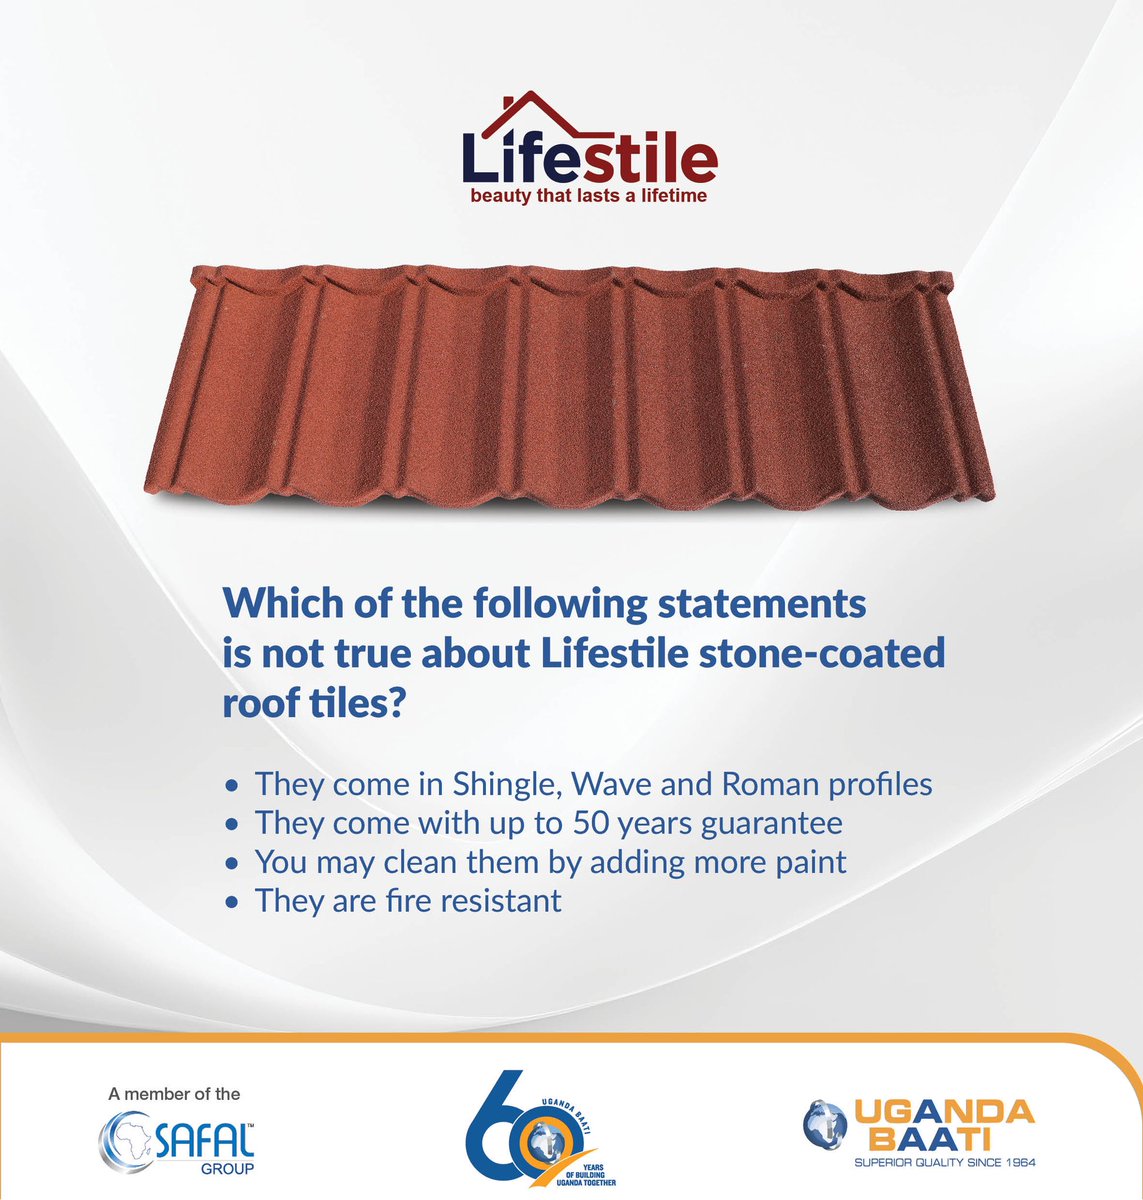 Which of the following statements is not true about Lifestile stone-coated roof tiles? @UgandaBaati   A.They come in Shingle, Wave and Roman profiles B.They come with up to 50 years guarantee C. You may clean them by adding more paint D.They are fire resistant #UgandaBaatiAt60